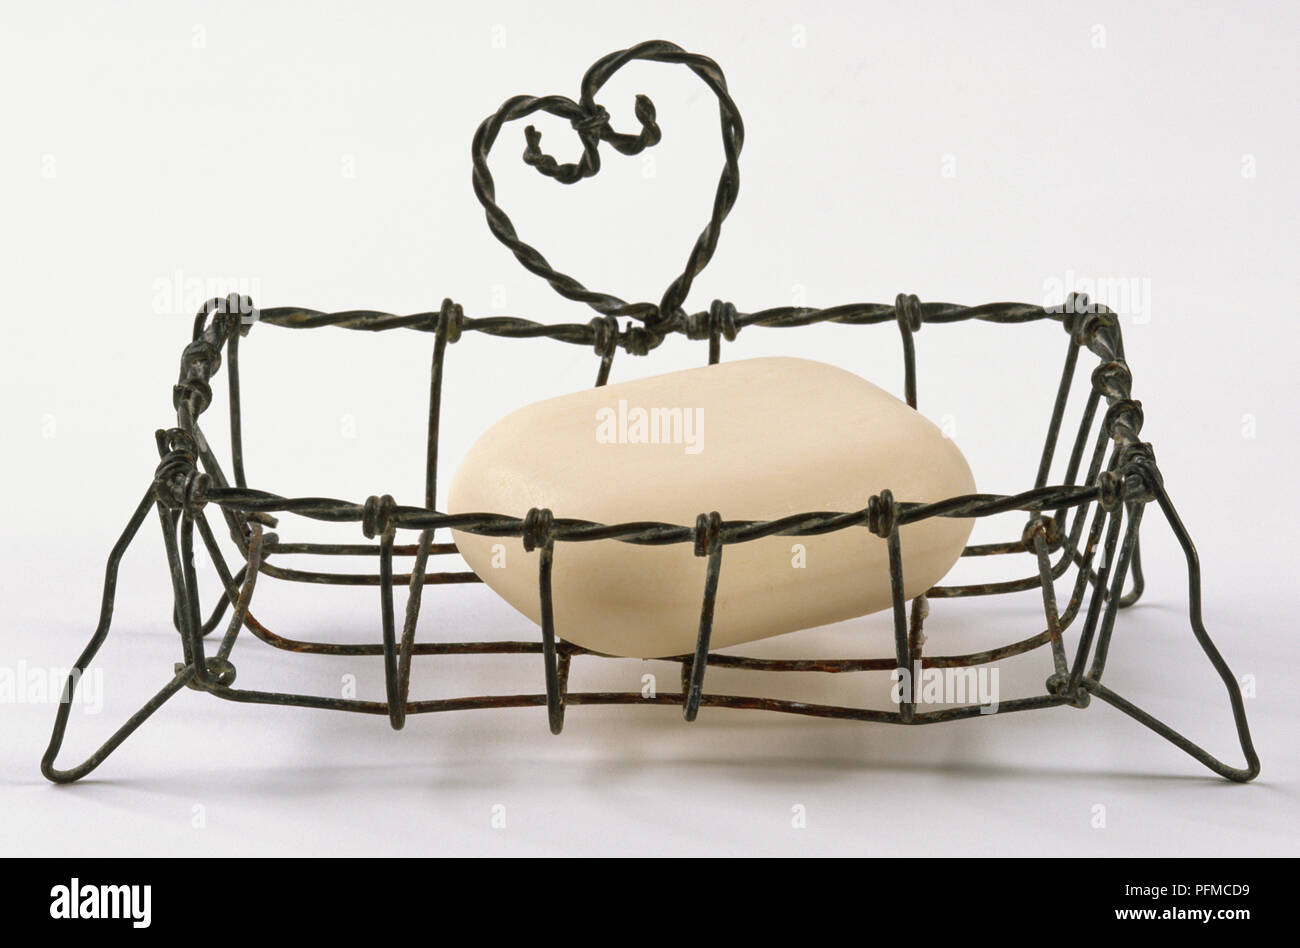 Wire soap rack, heart-shaped design, holding bar of soap. Stock Photo